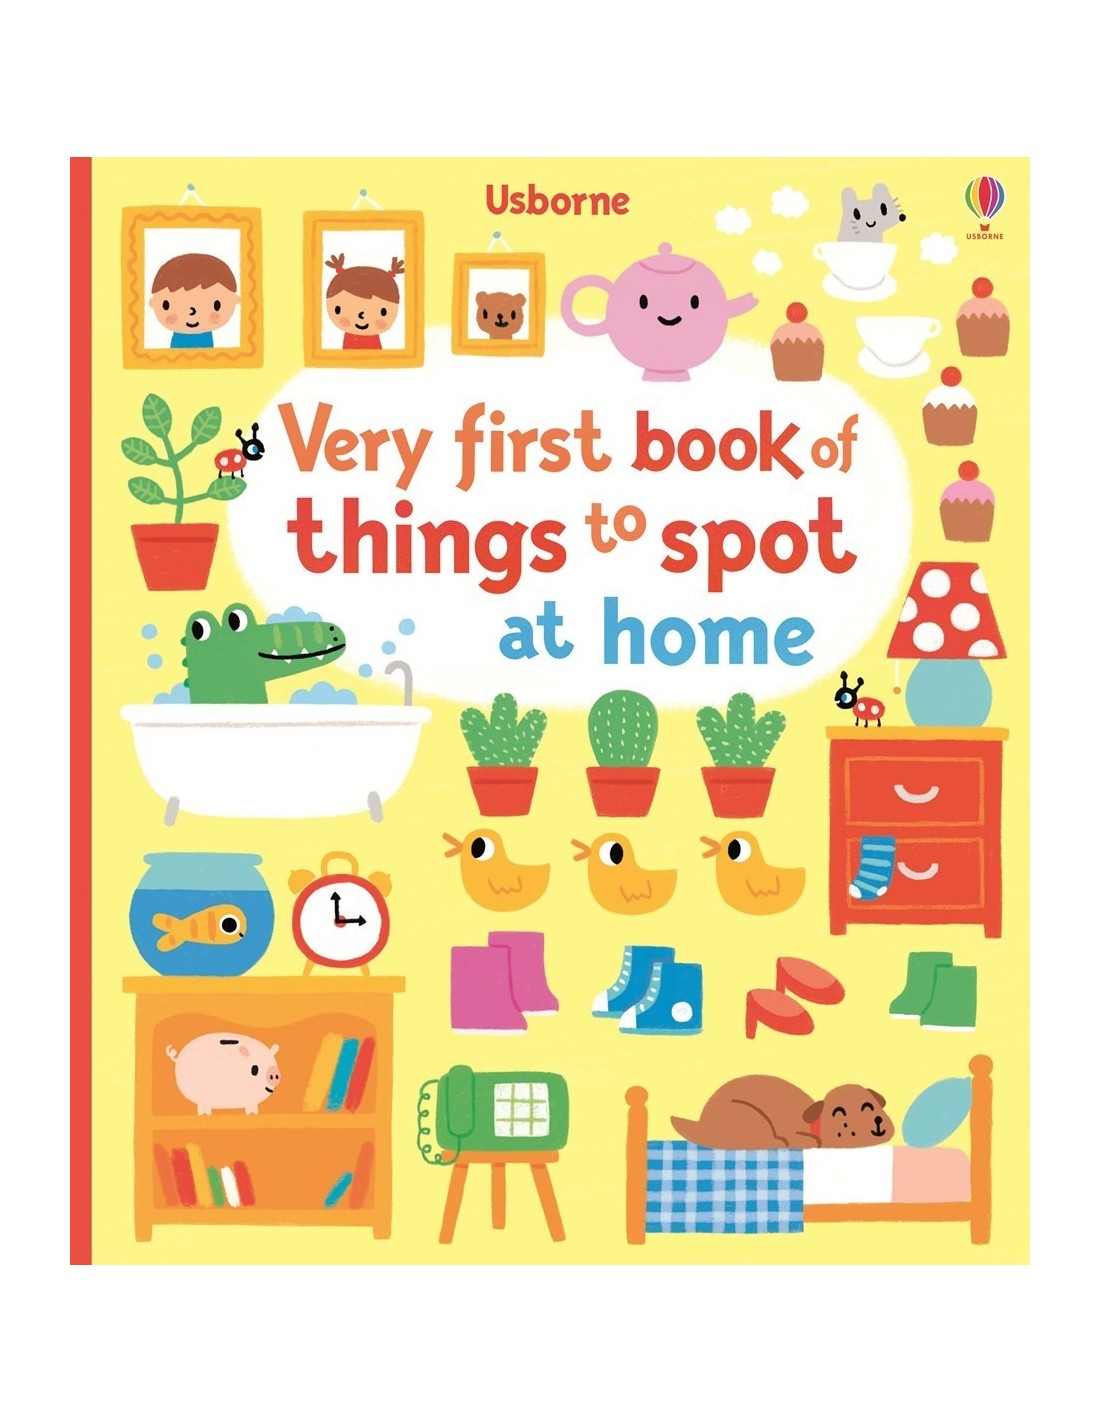 Very first book of things to spot at home